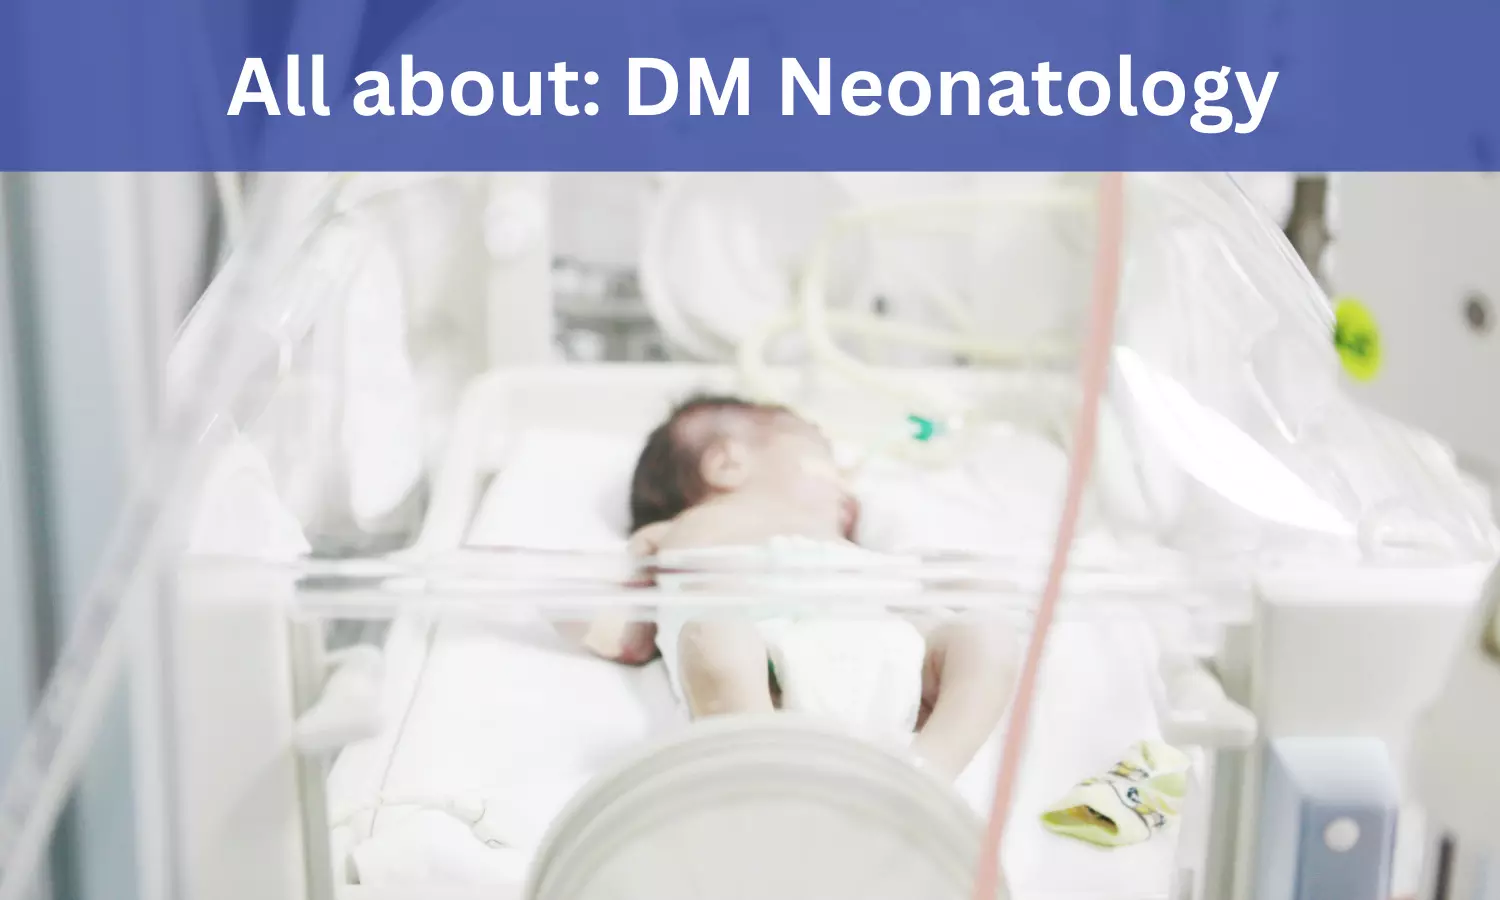 DM Neonatology: Admissions, Medical Colleges, Fees, Eligibility Criteria details here